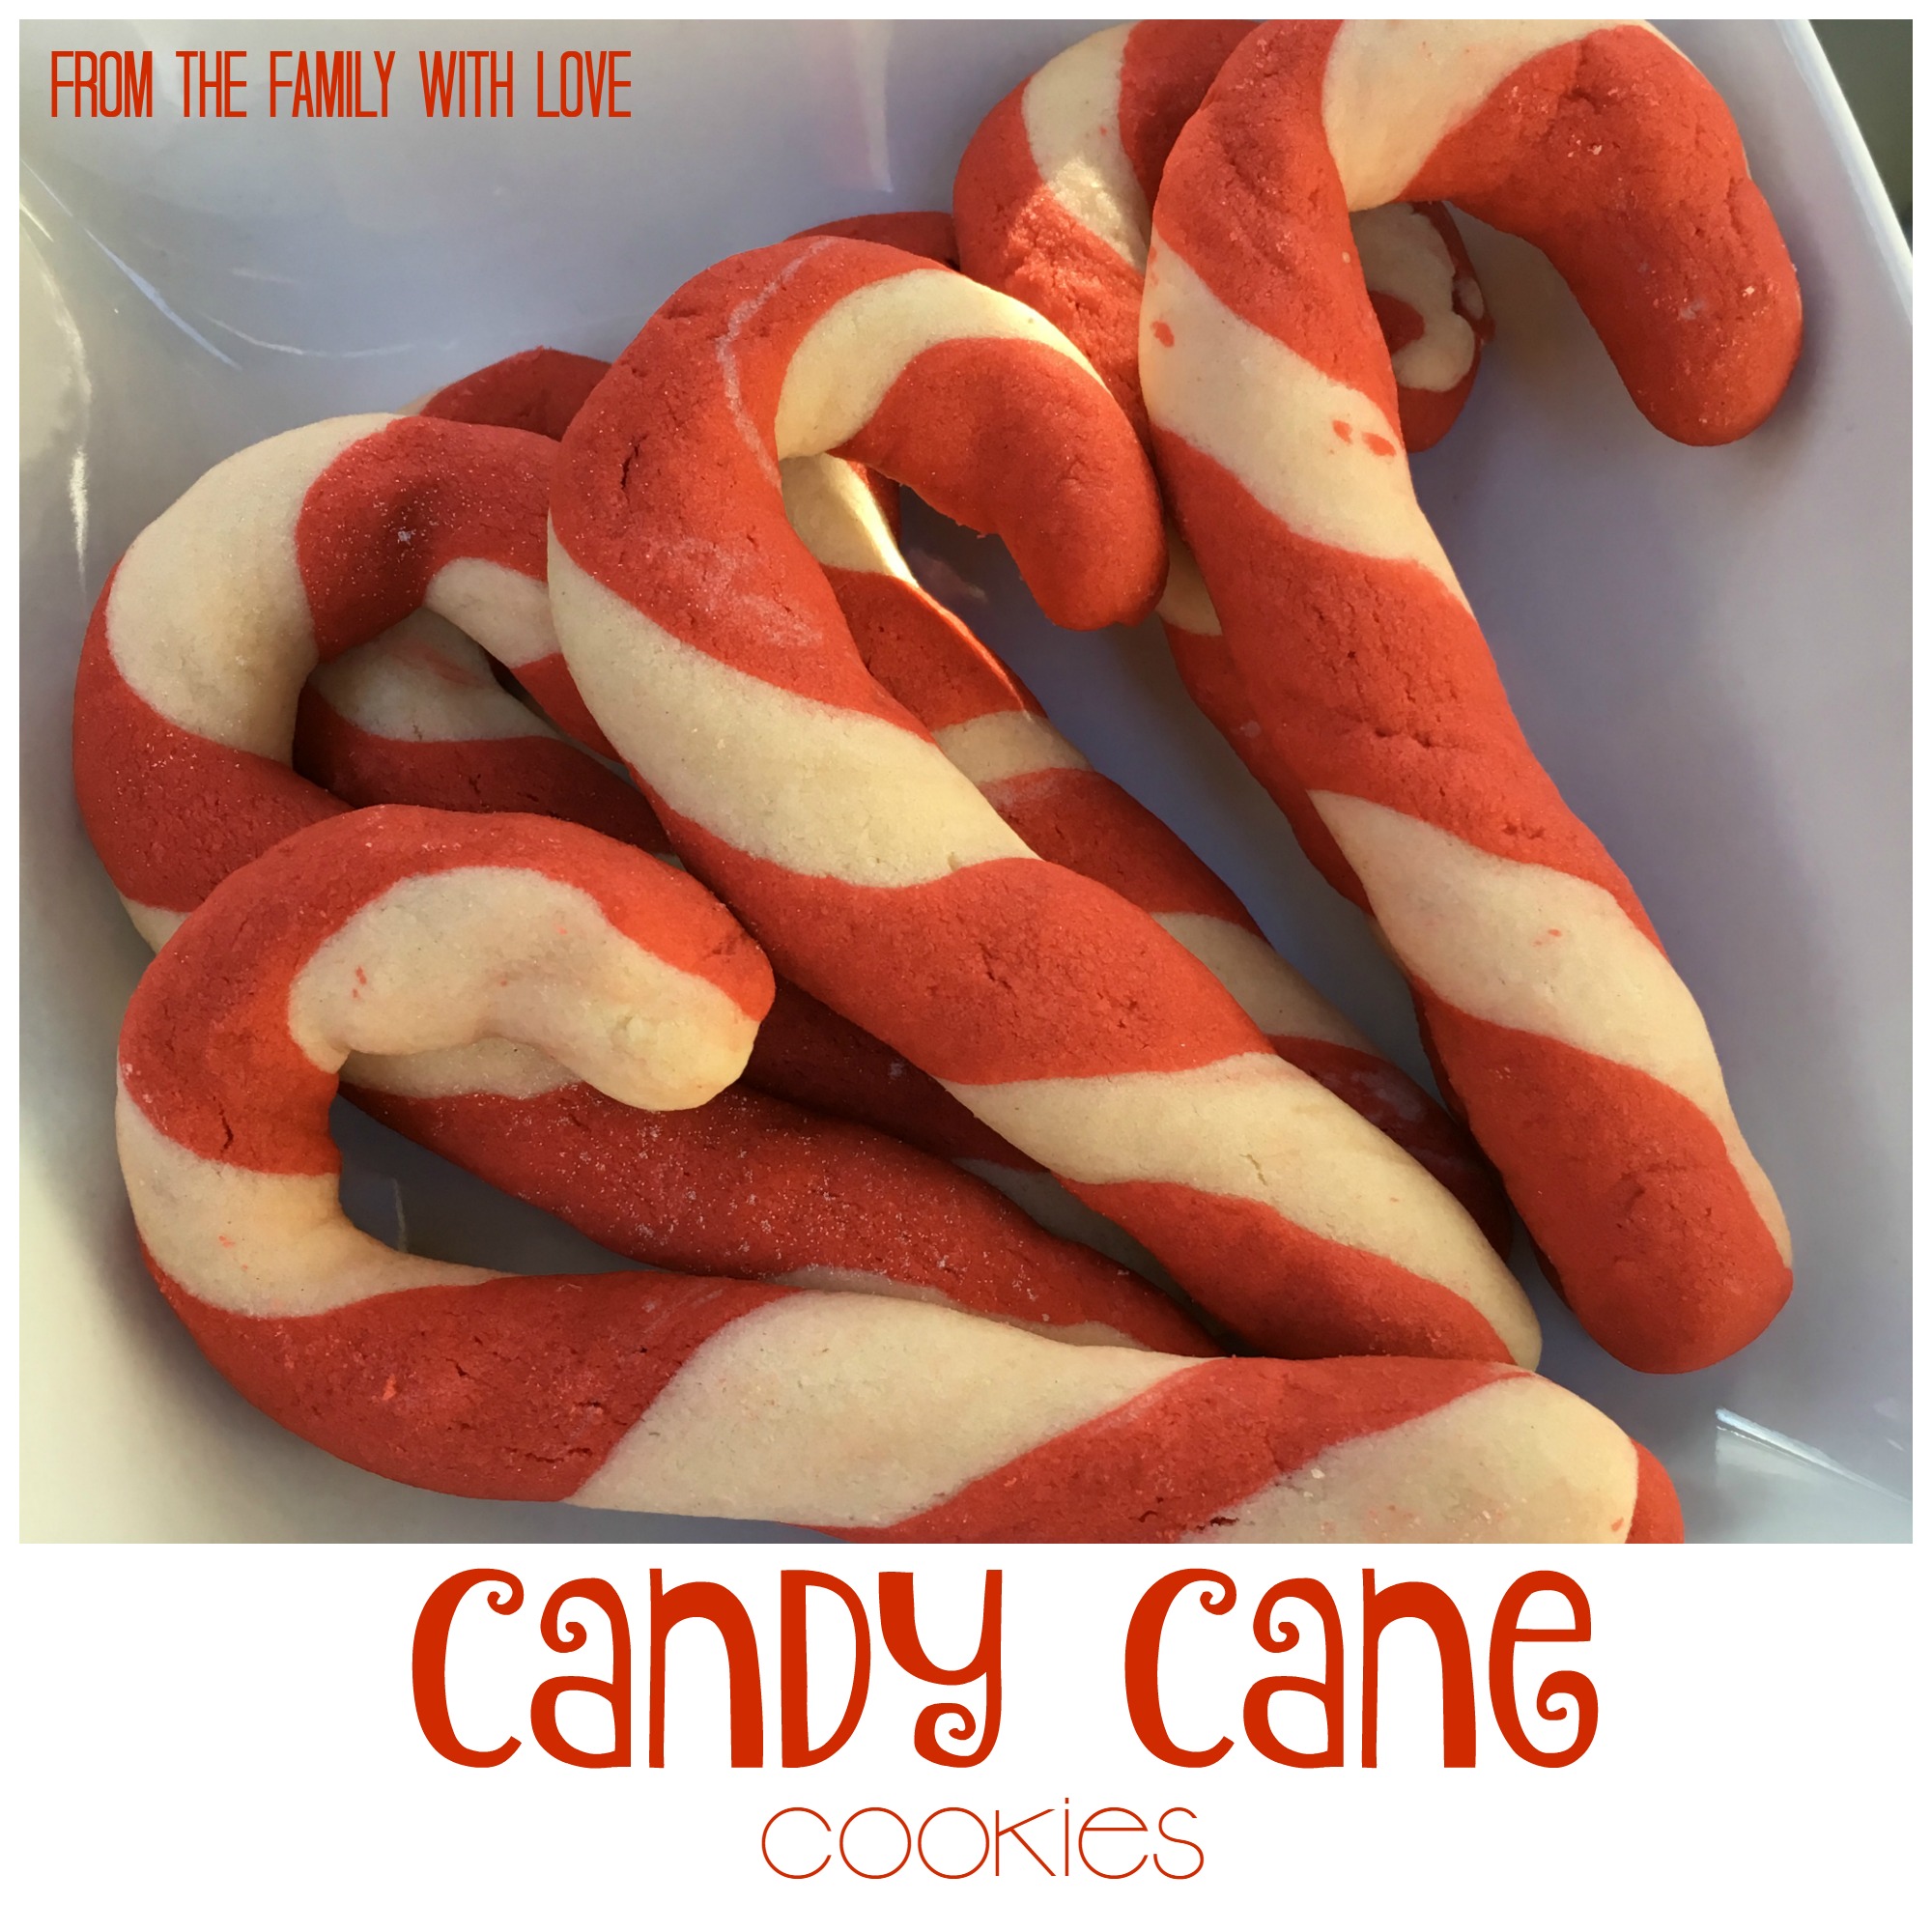 Carter’s Christmas Cookies: Candy Cane Cookies